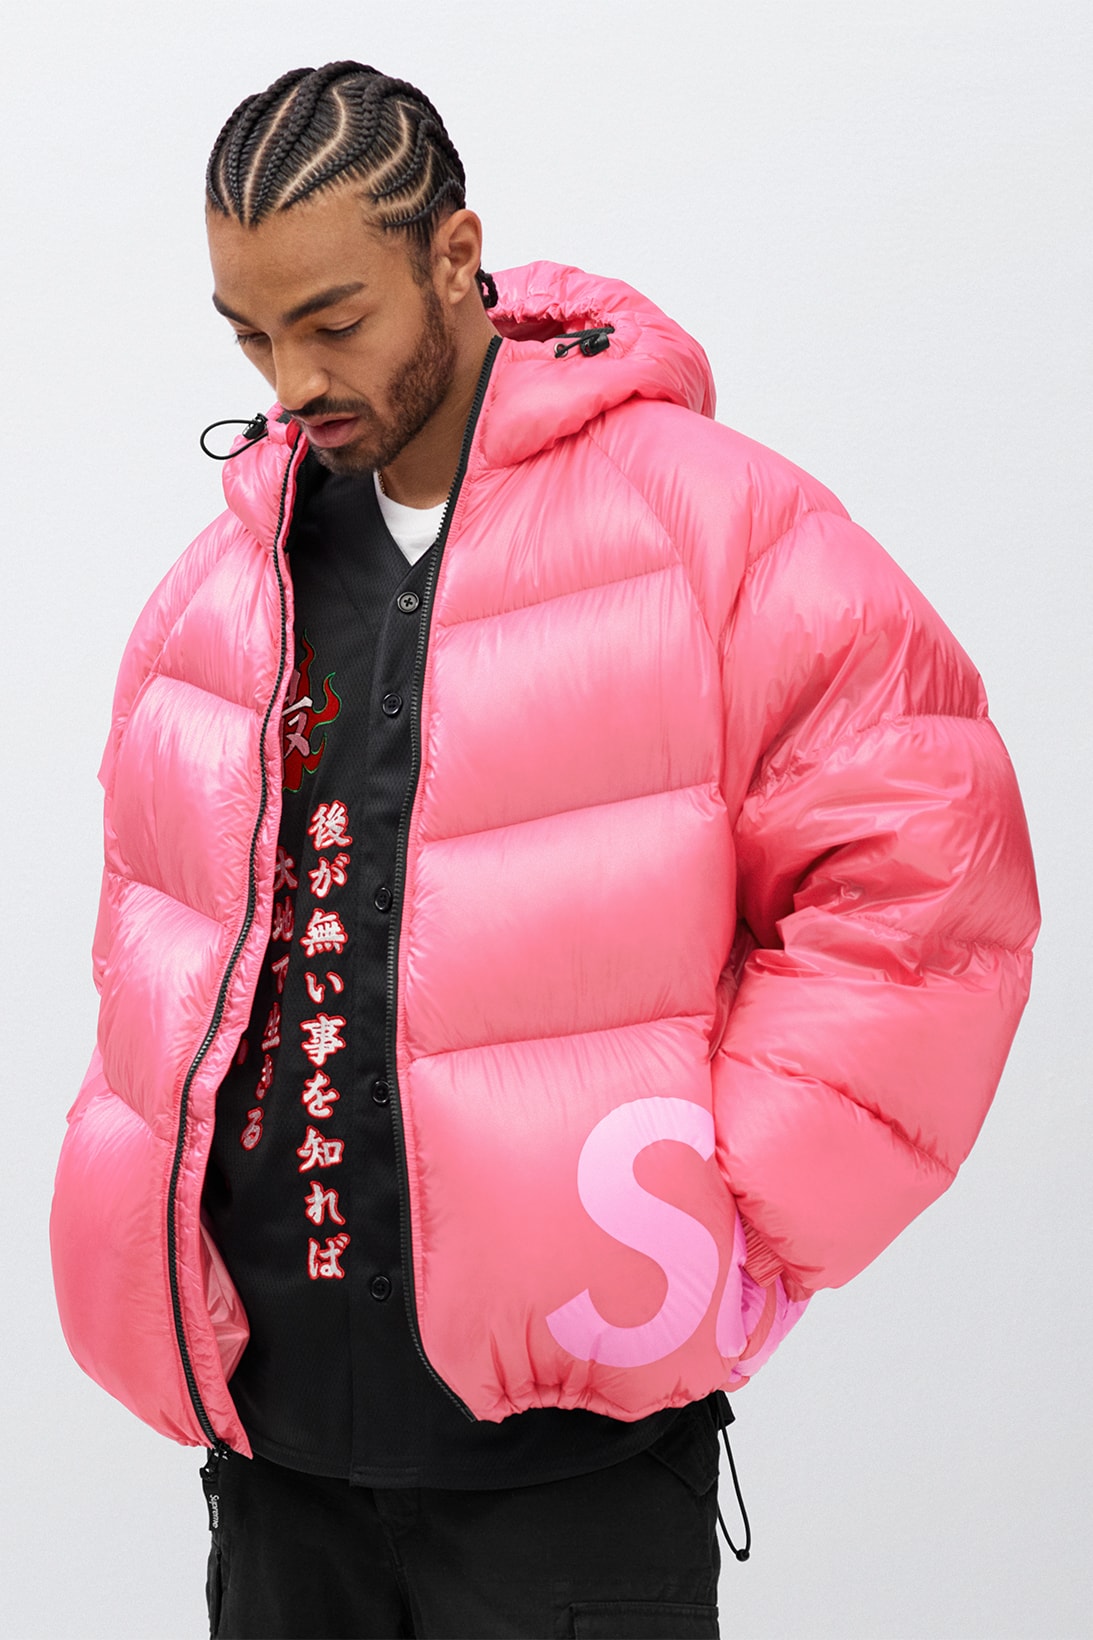 supreme fall winter collection the smurfs outerwear jackets pants pink black denim